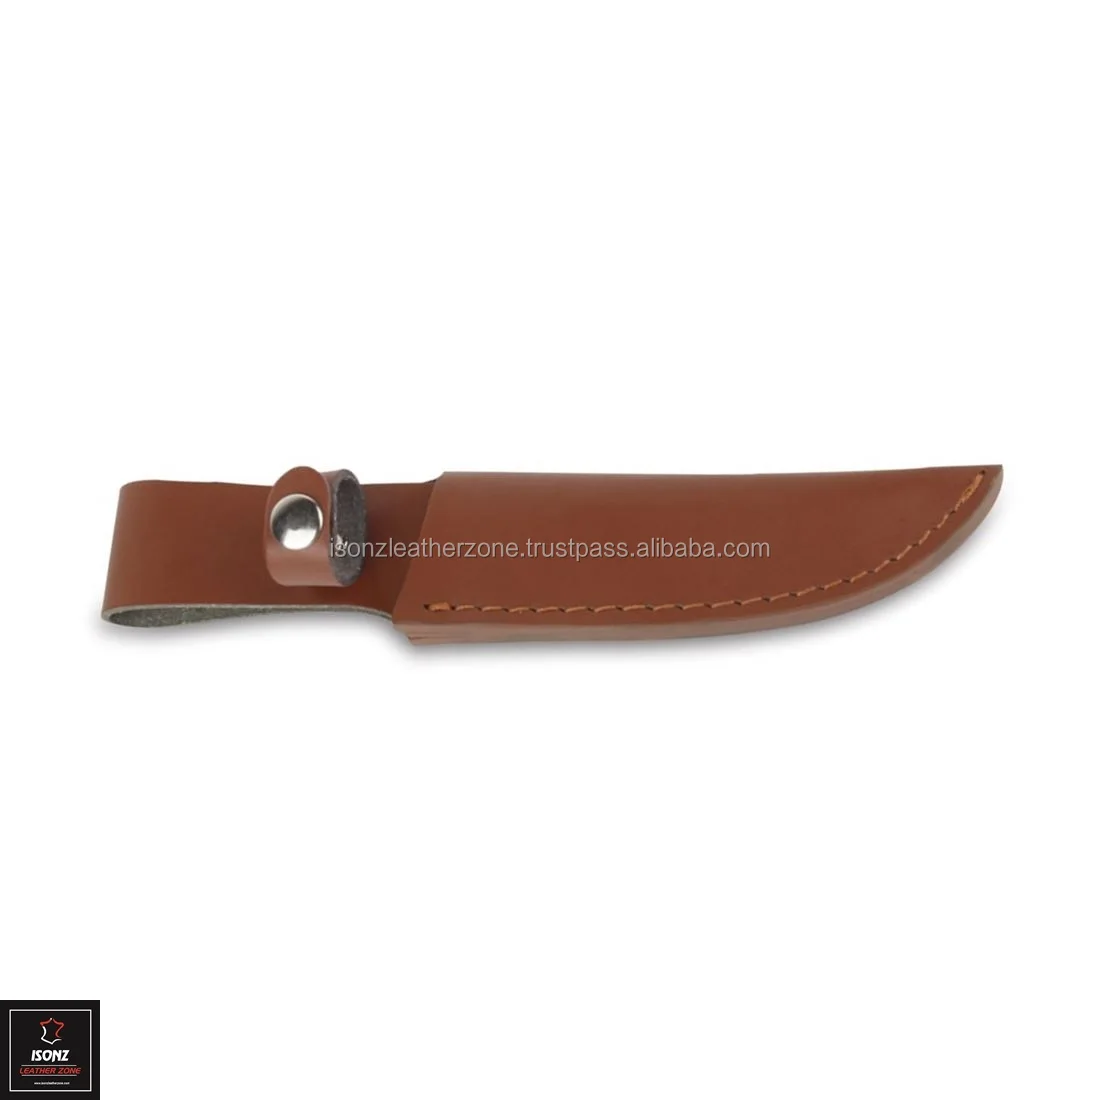 Sheath Kit #6 for knives with blades up to 2” wide by 10" long Leather 